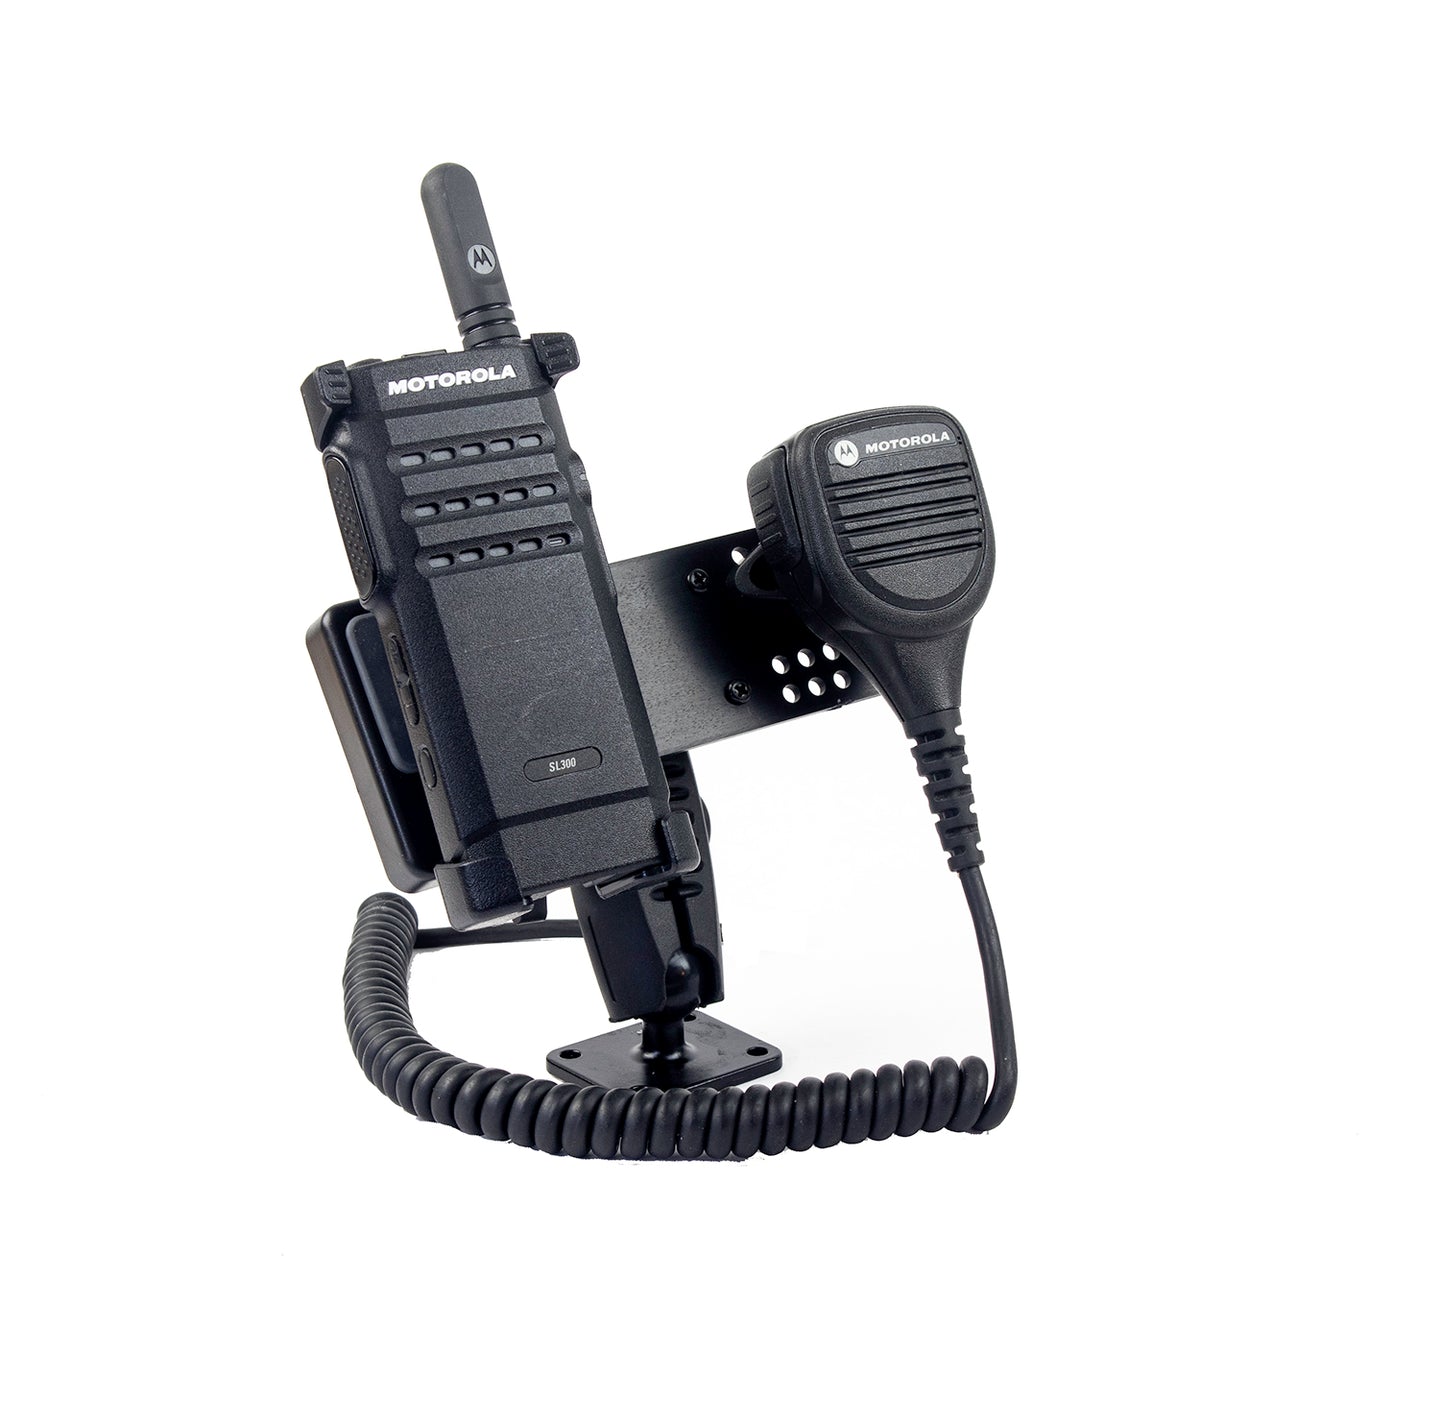 Fleet Vehicle Mount With Speaker Mic Holder For All Portables and Speaker Mics With a Clip